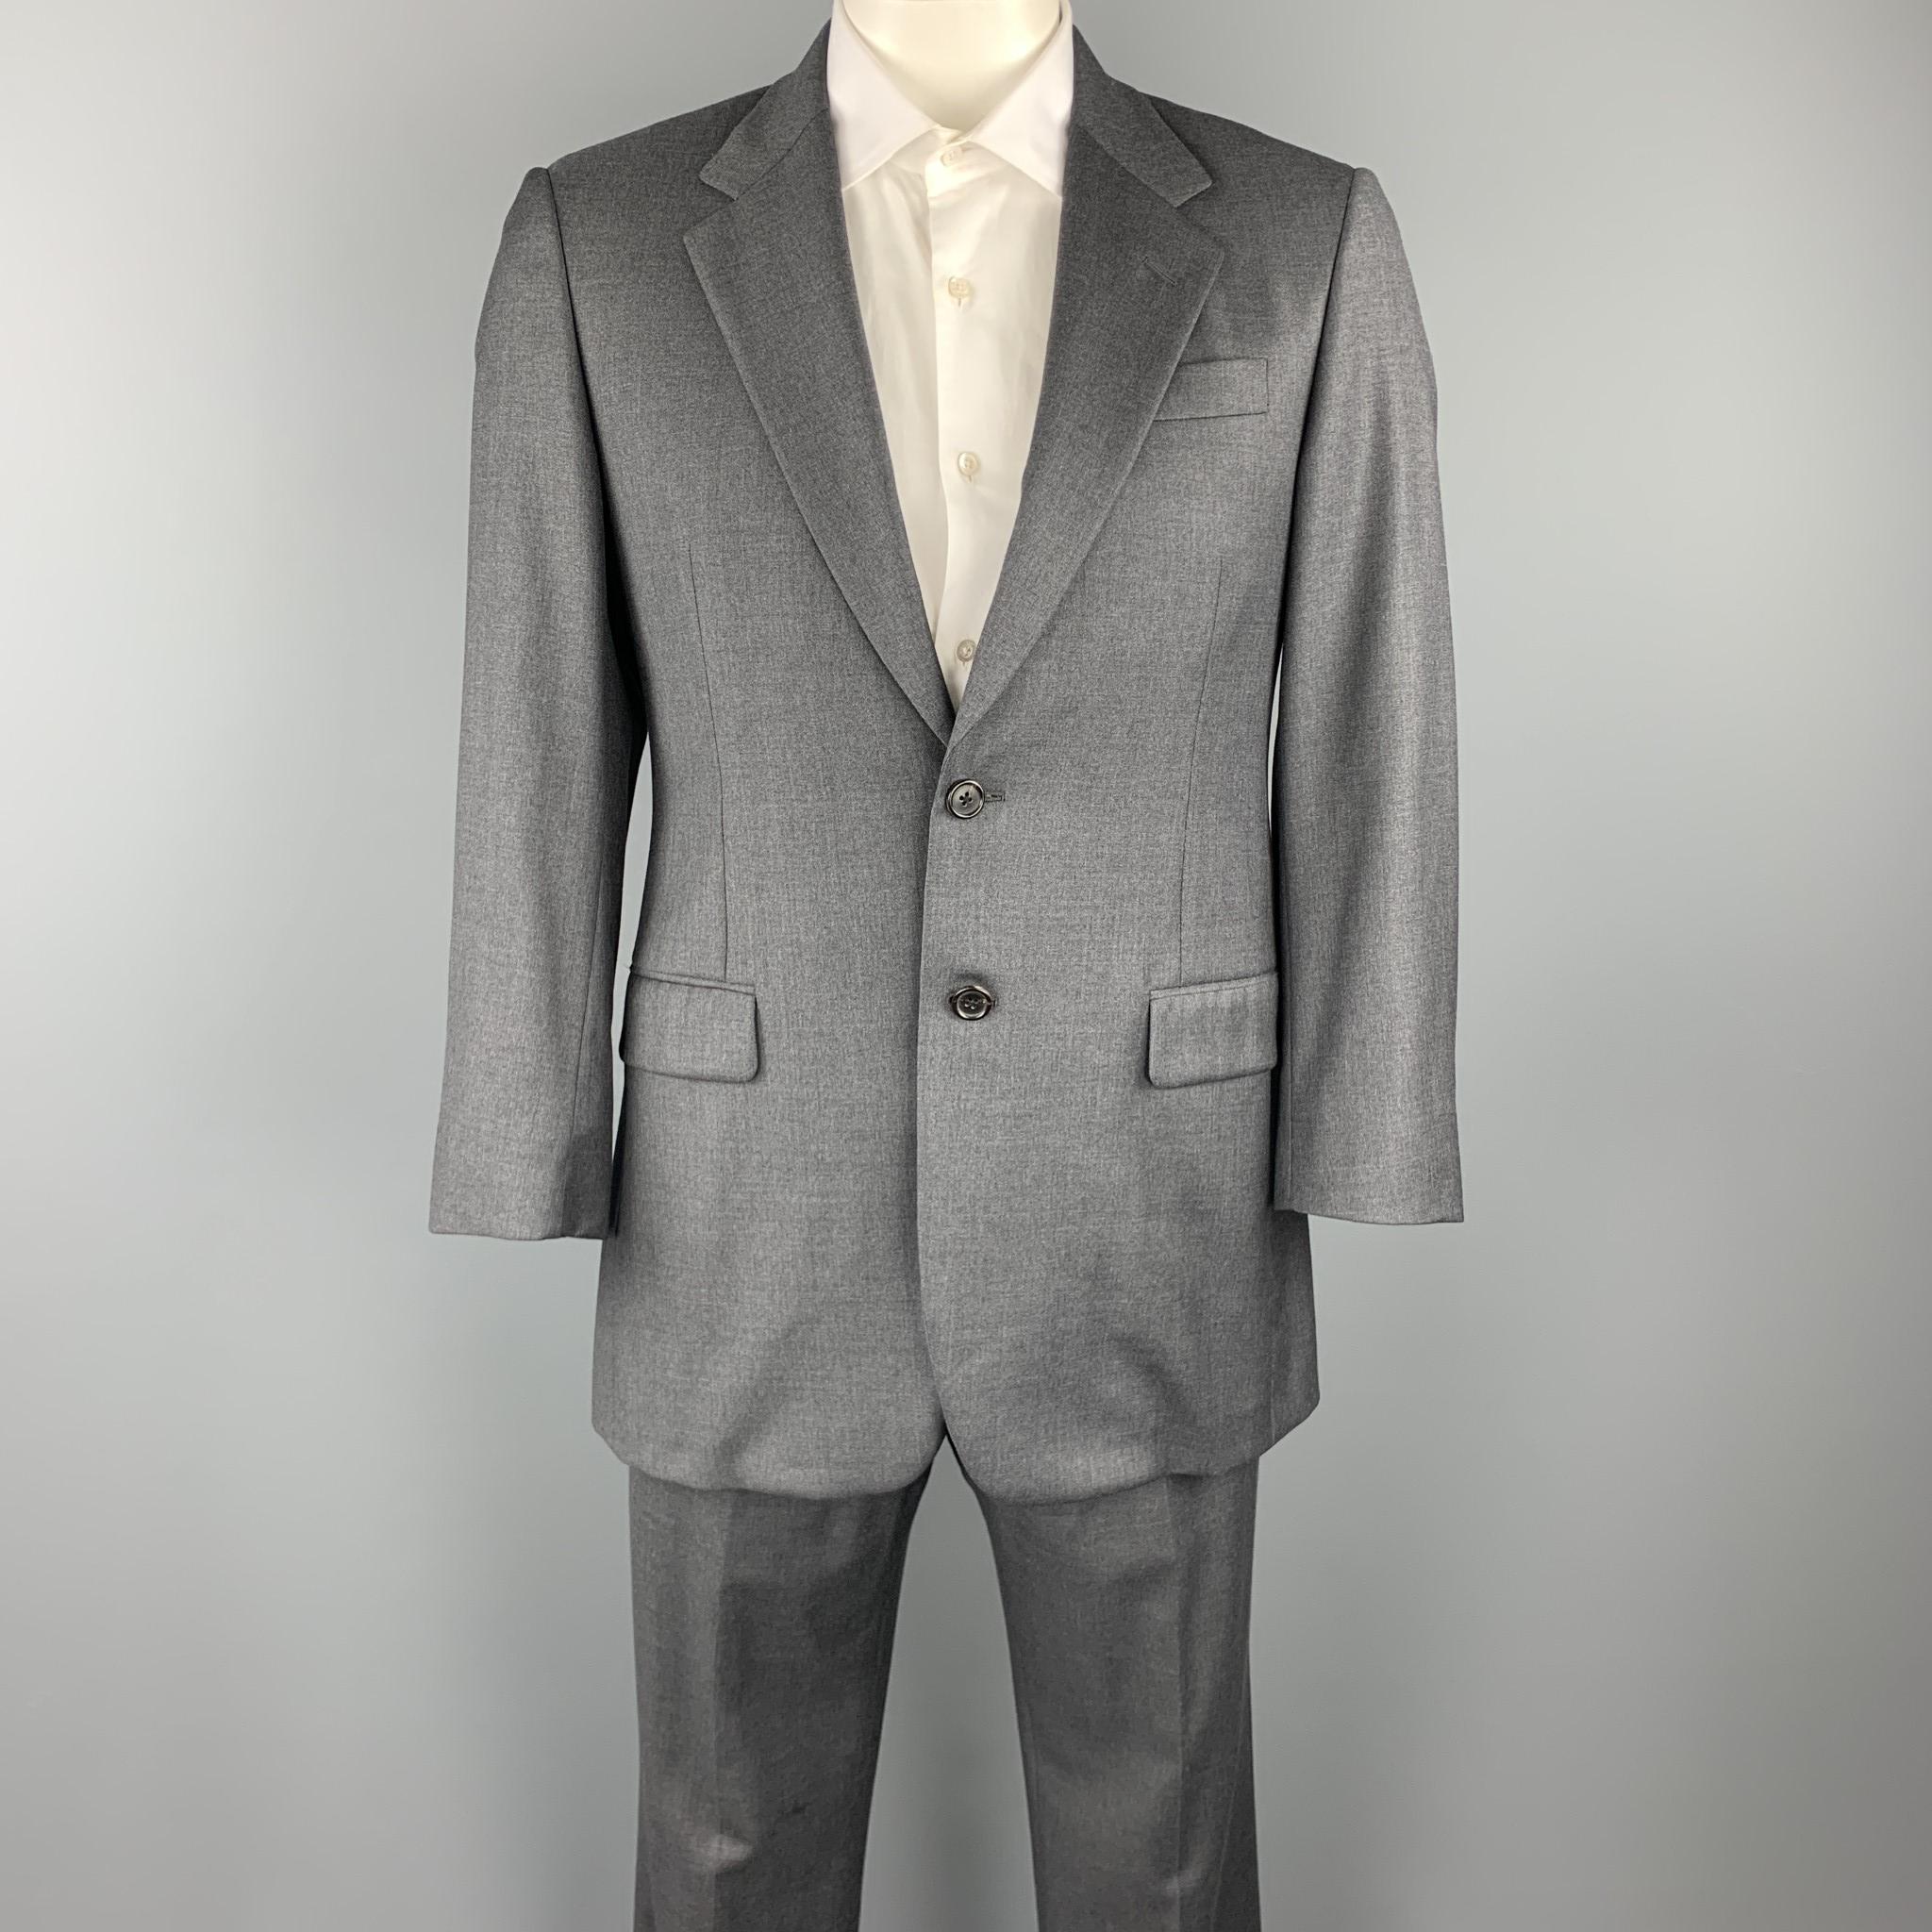 PRADA suit comes in a gray wool with a black rayon liner and includes a single breasted, two button sport coat with a notch lapel and matching flat front trousers. As-Is. Minor damage on lining. Made in Italy.

Very Good Pre-Owned Condition.
Marked: